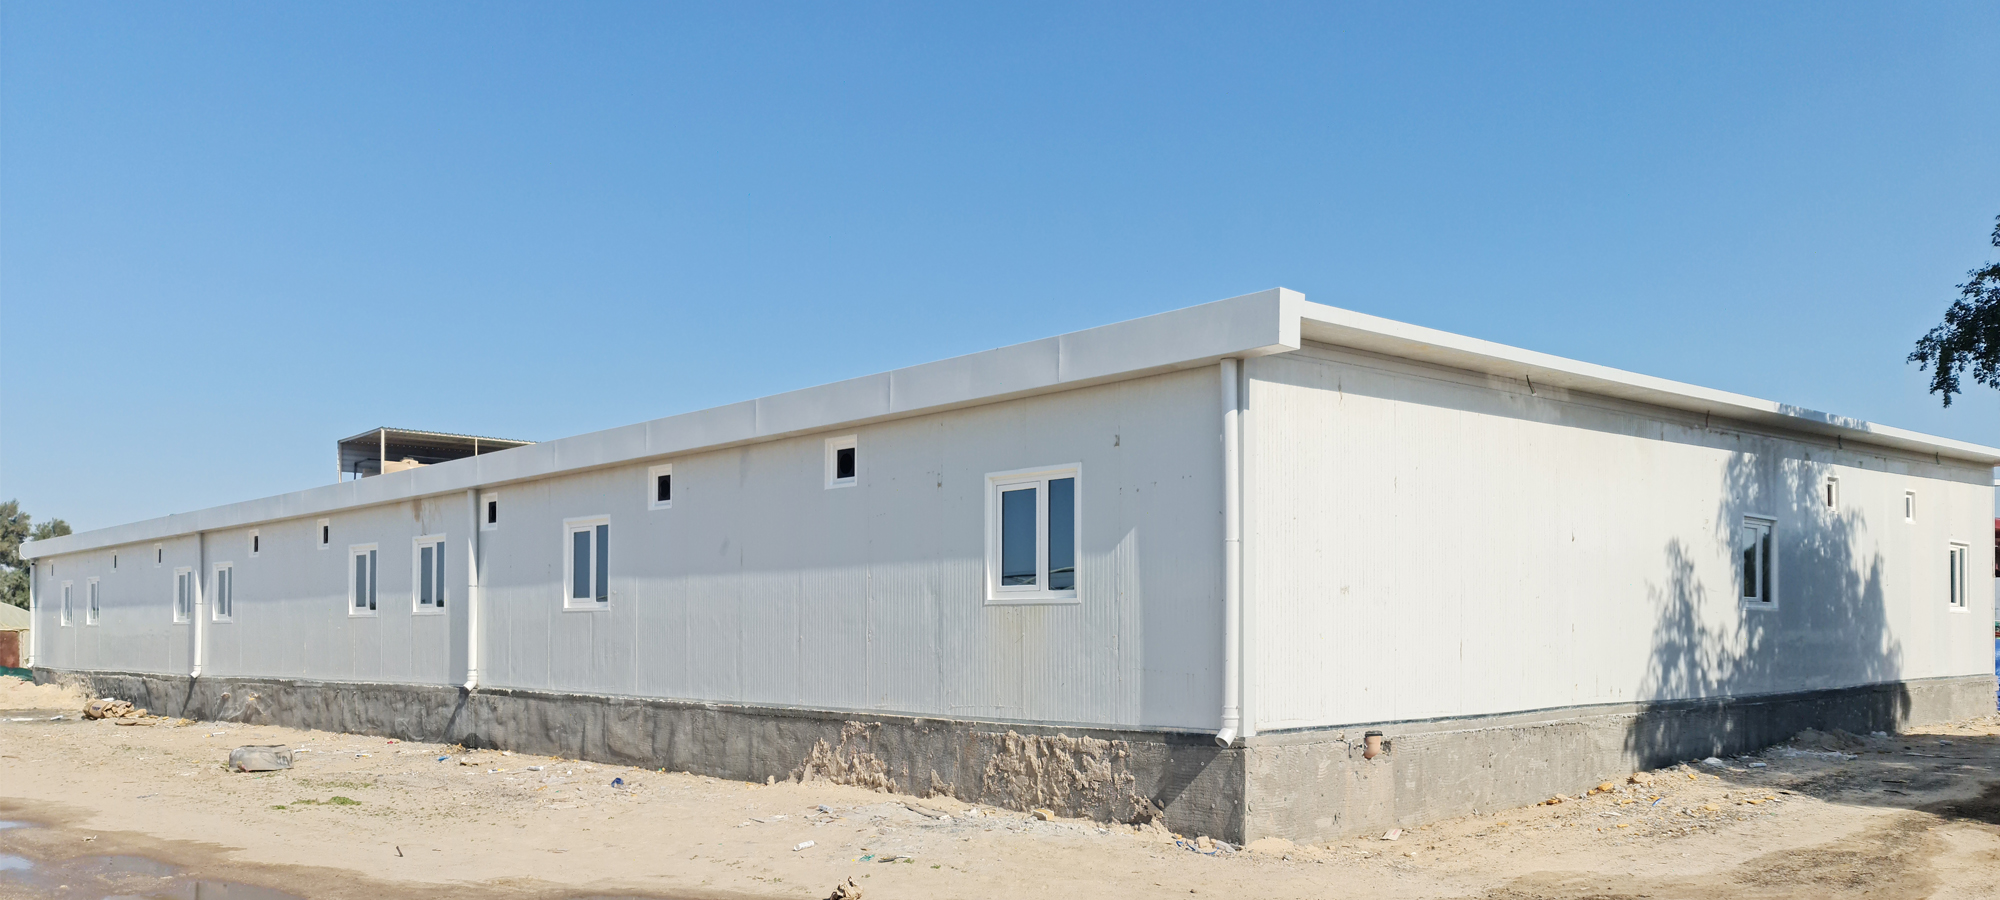 house build in Kuwait with high standards manufacture from sandwich-panels